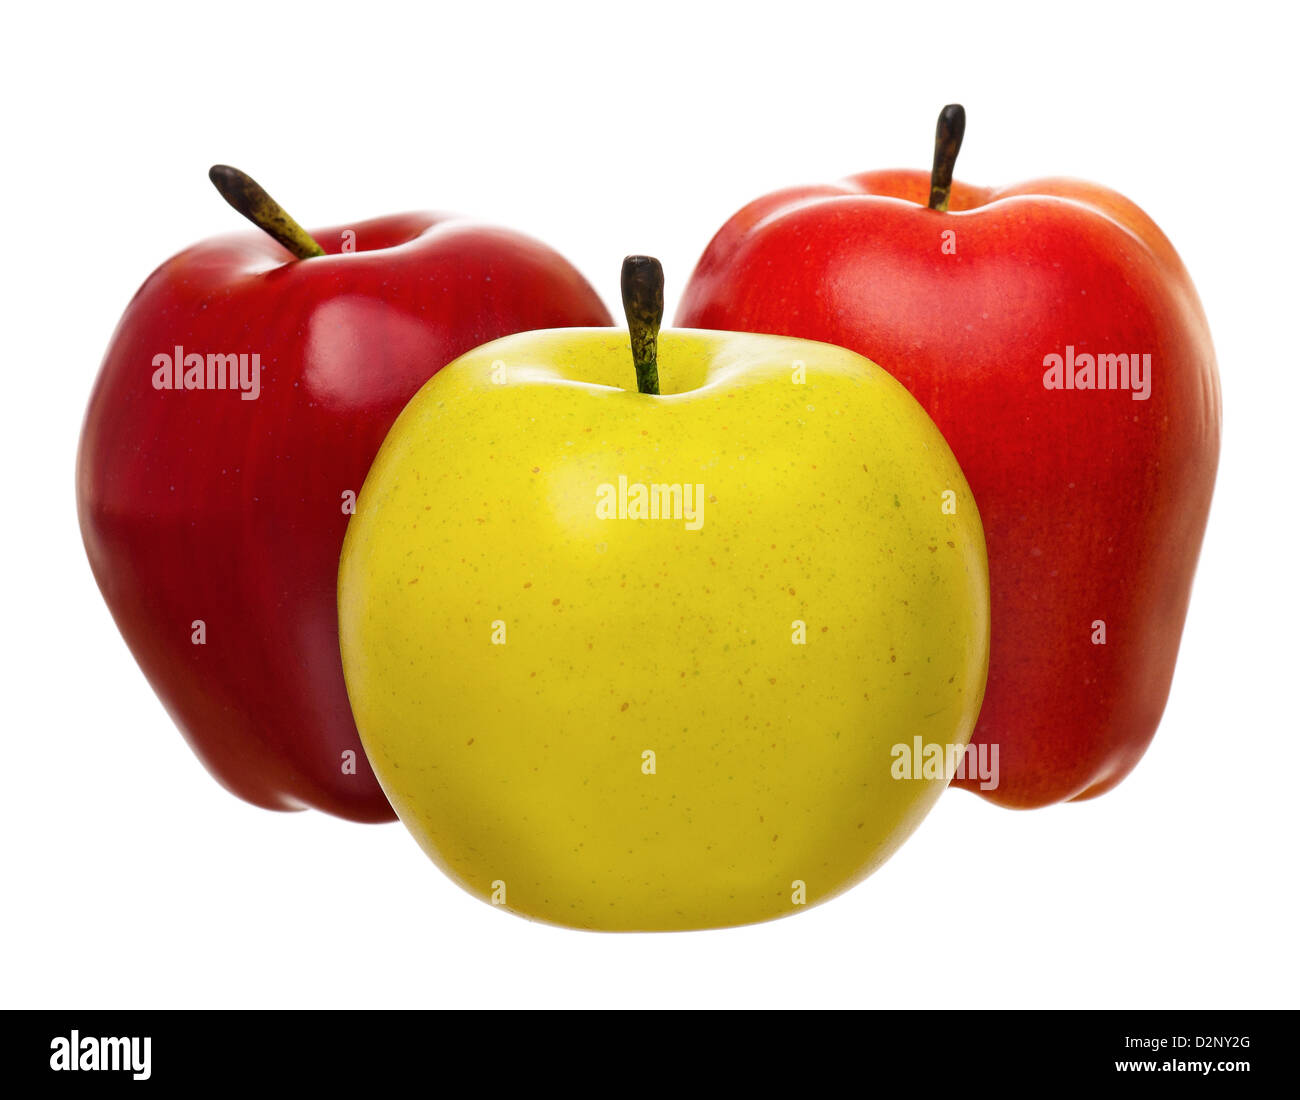 Artificial red, orange and green apples, isolated on white background Stock Photo